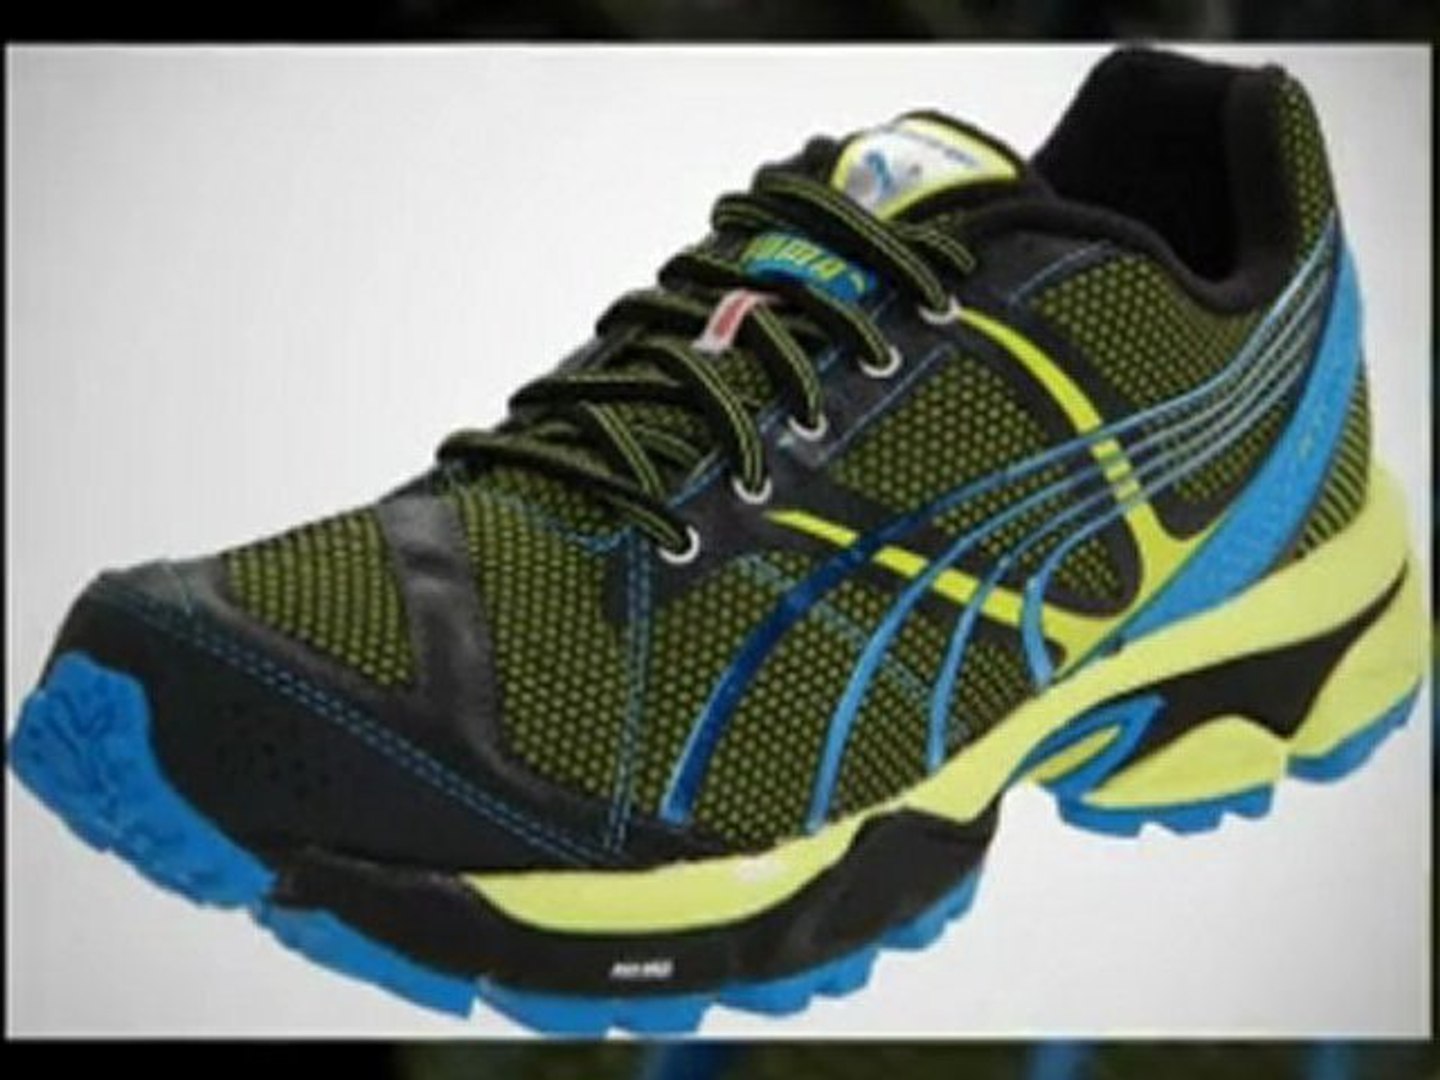 Top Deal Review - PUMA Men's Complete Nightfox TR ... - video Dailymotion